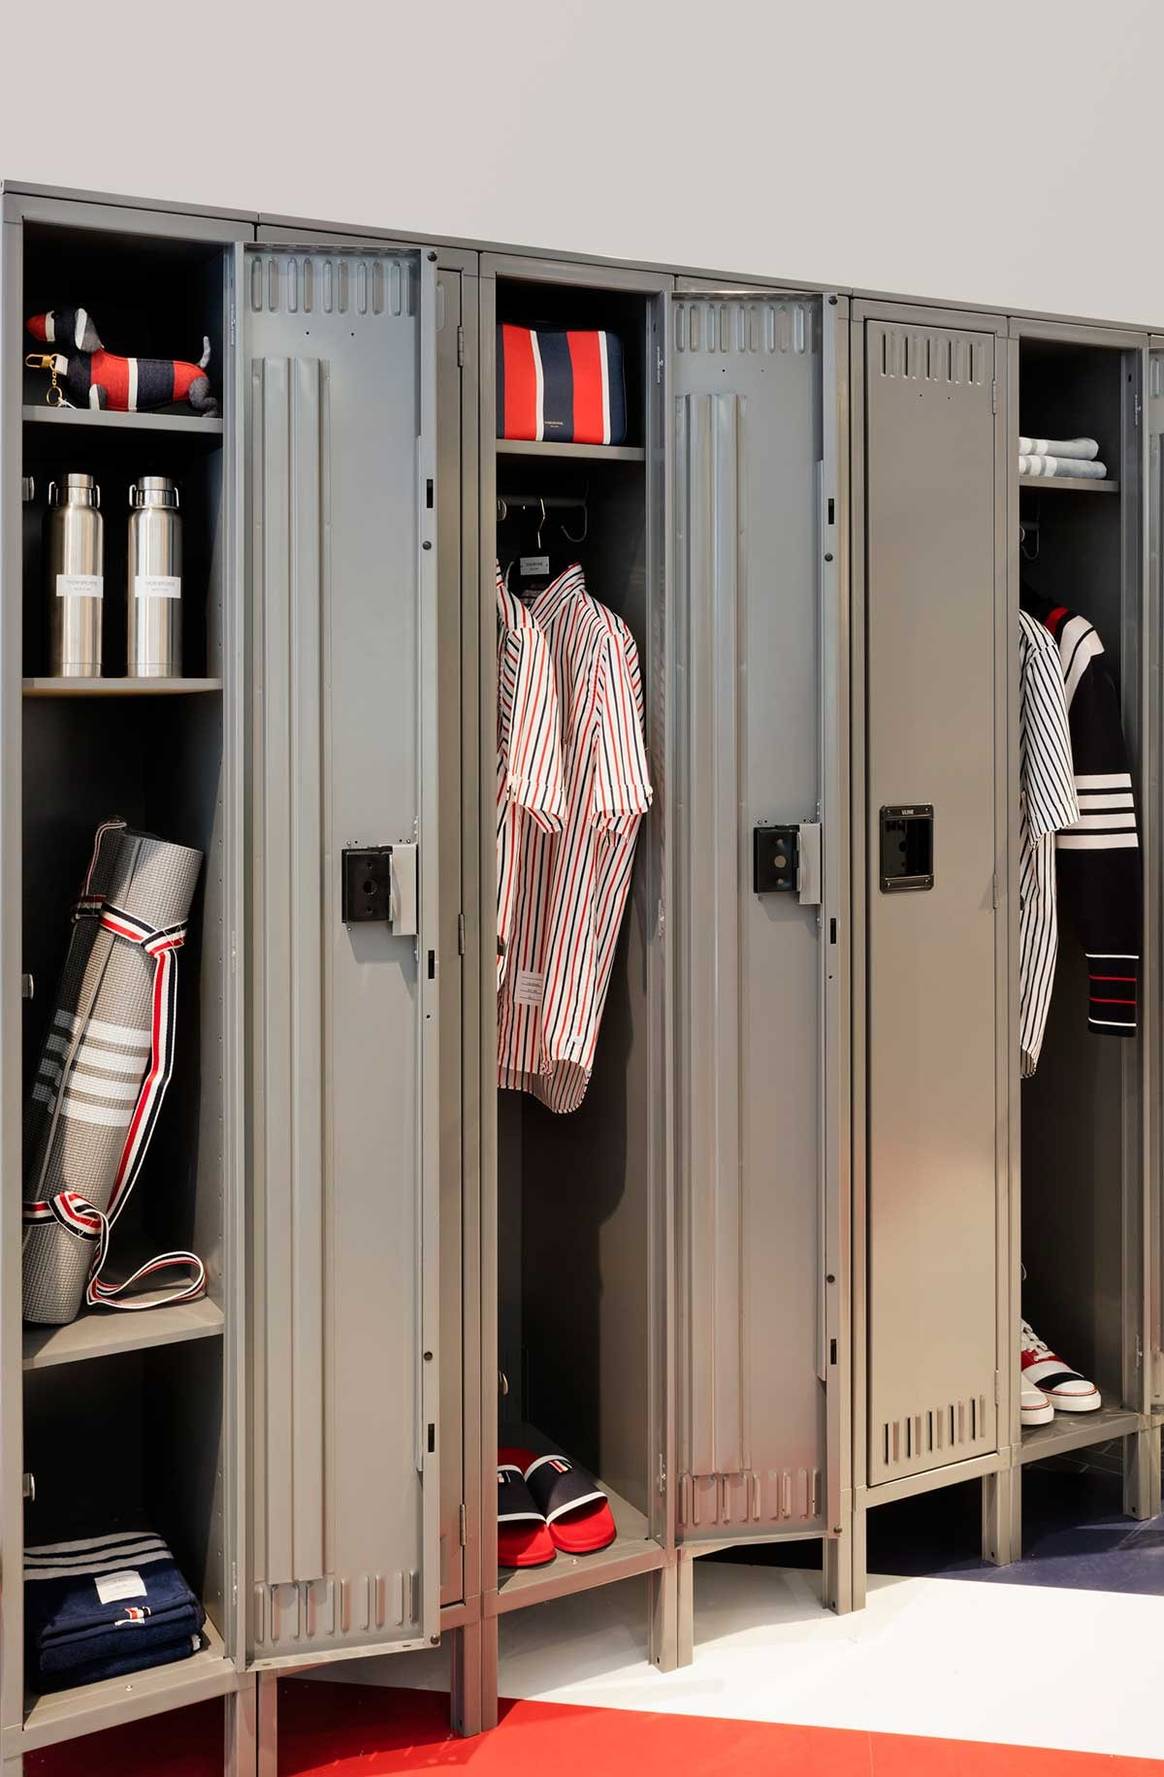 Thom Browne launches collaborative collection with Nordstrom